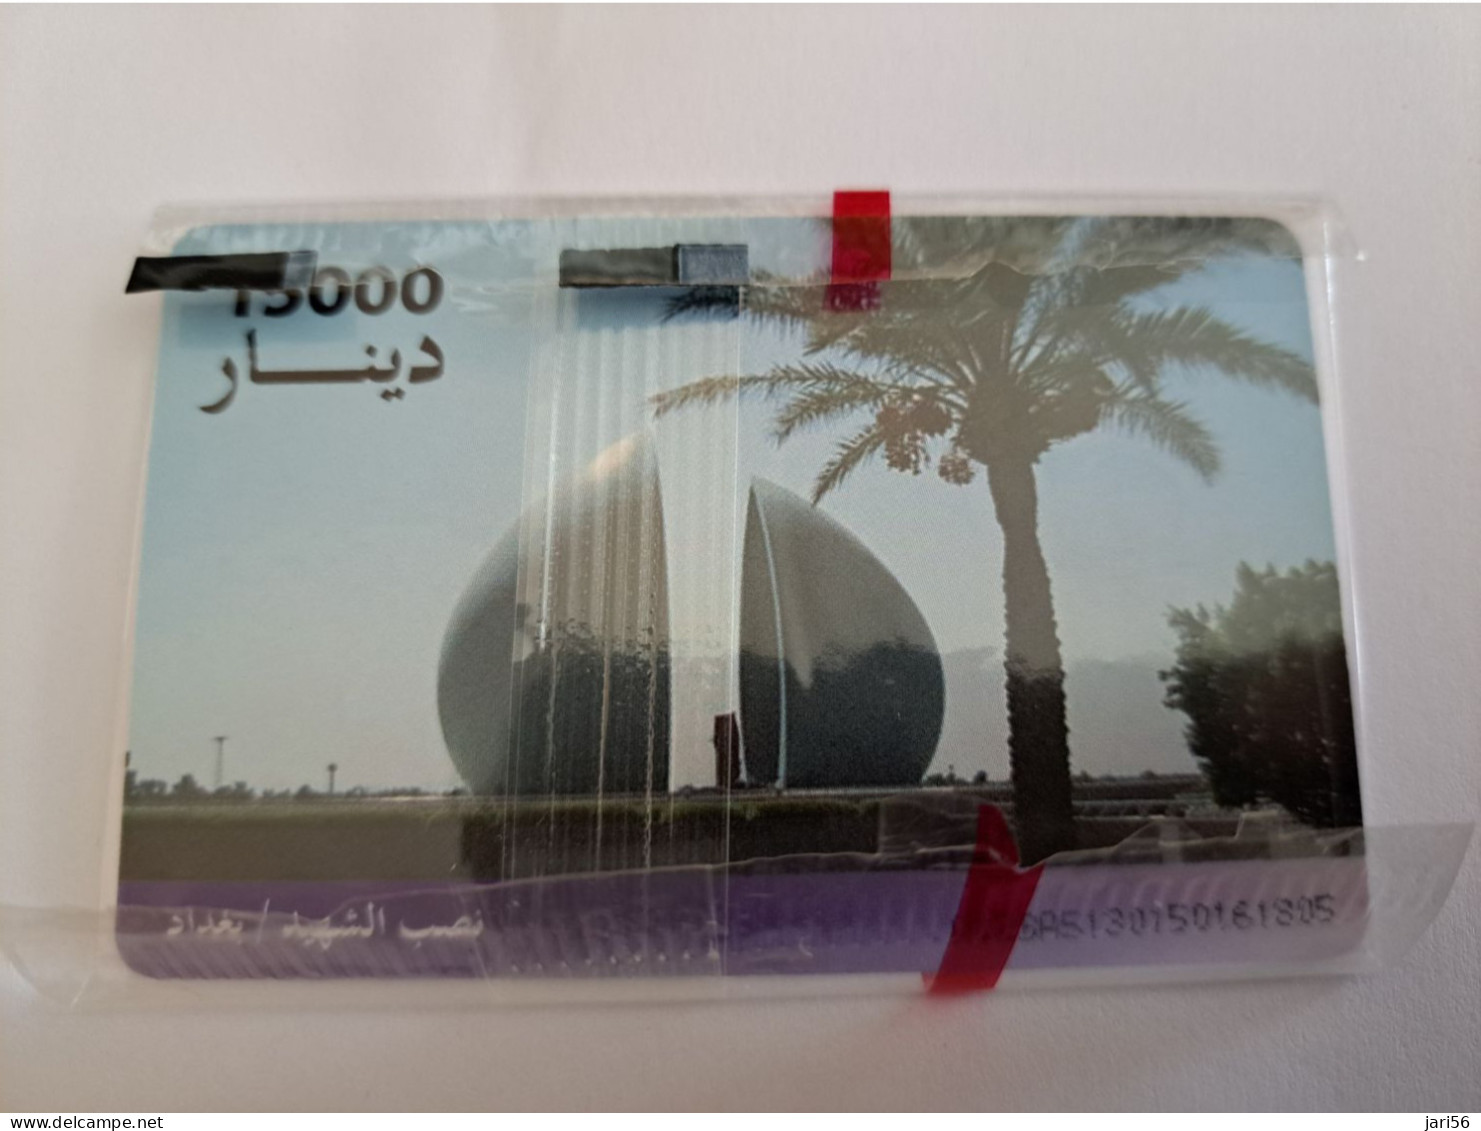 IRAK  CHIPCARD 15000 UNITS  ITPC  BUILDING WITH PALMTREE     MINT IN WRAPPER   **13802** - Irak